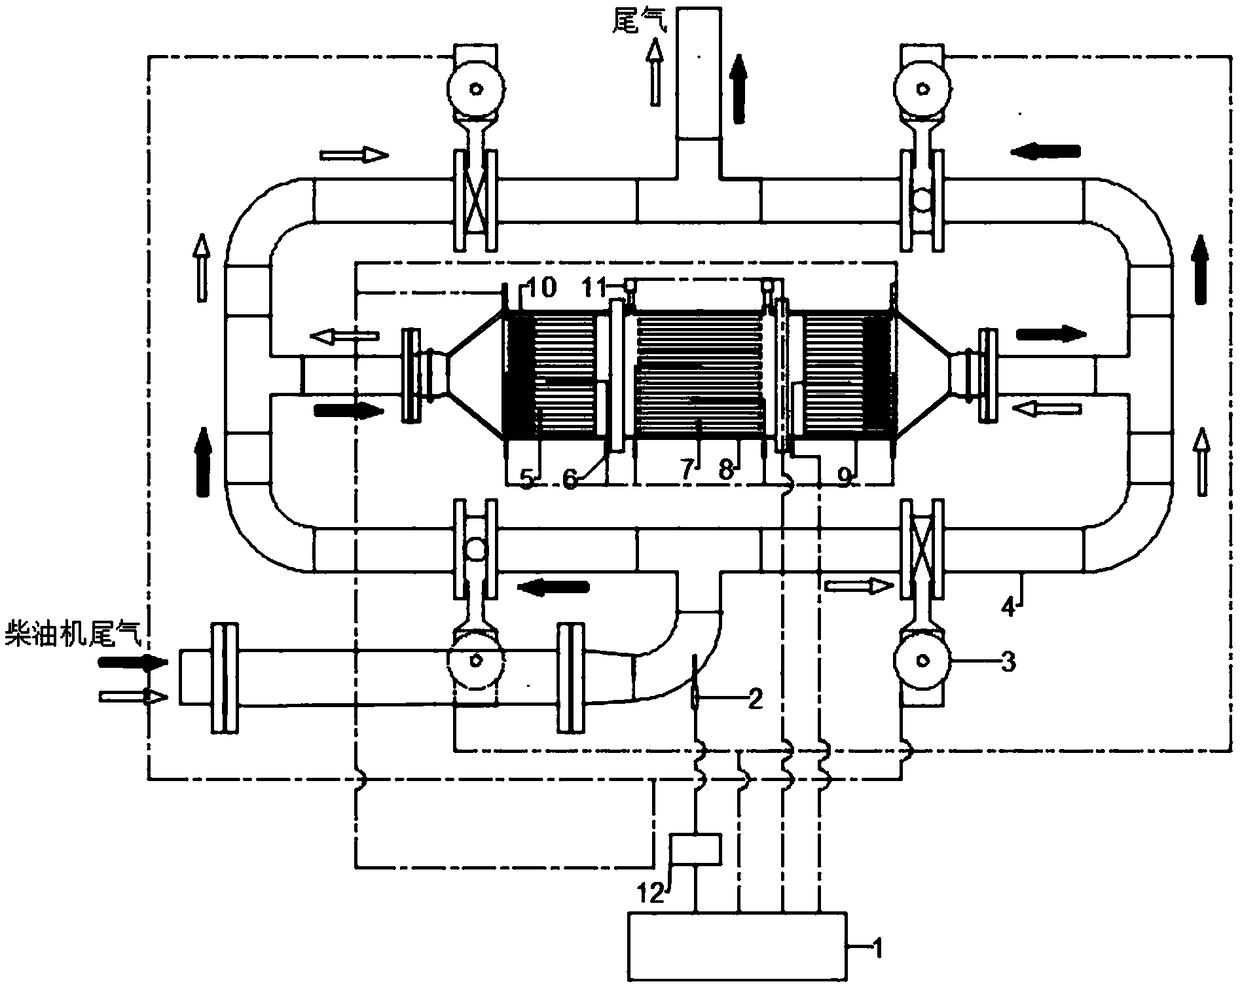 Diesel engine pollutant treatment system and method